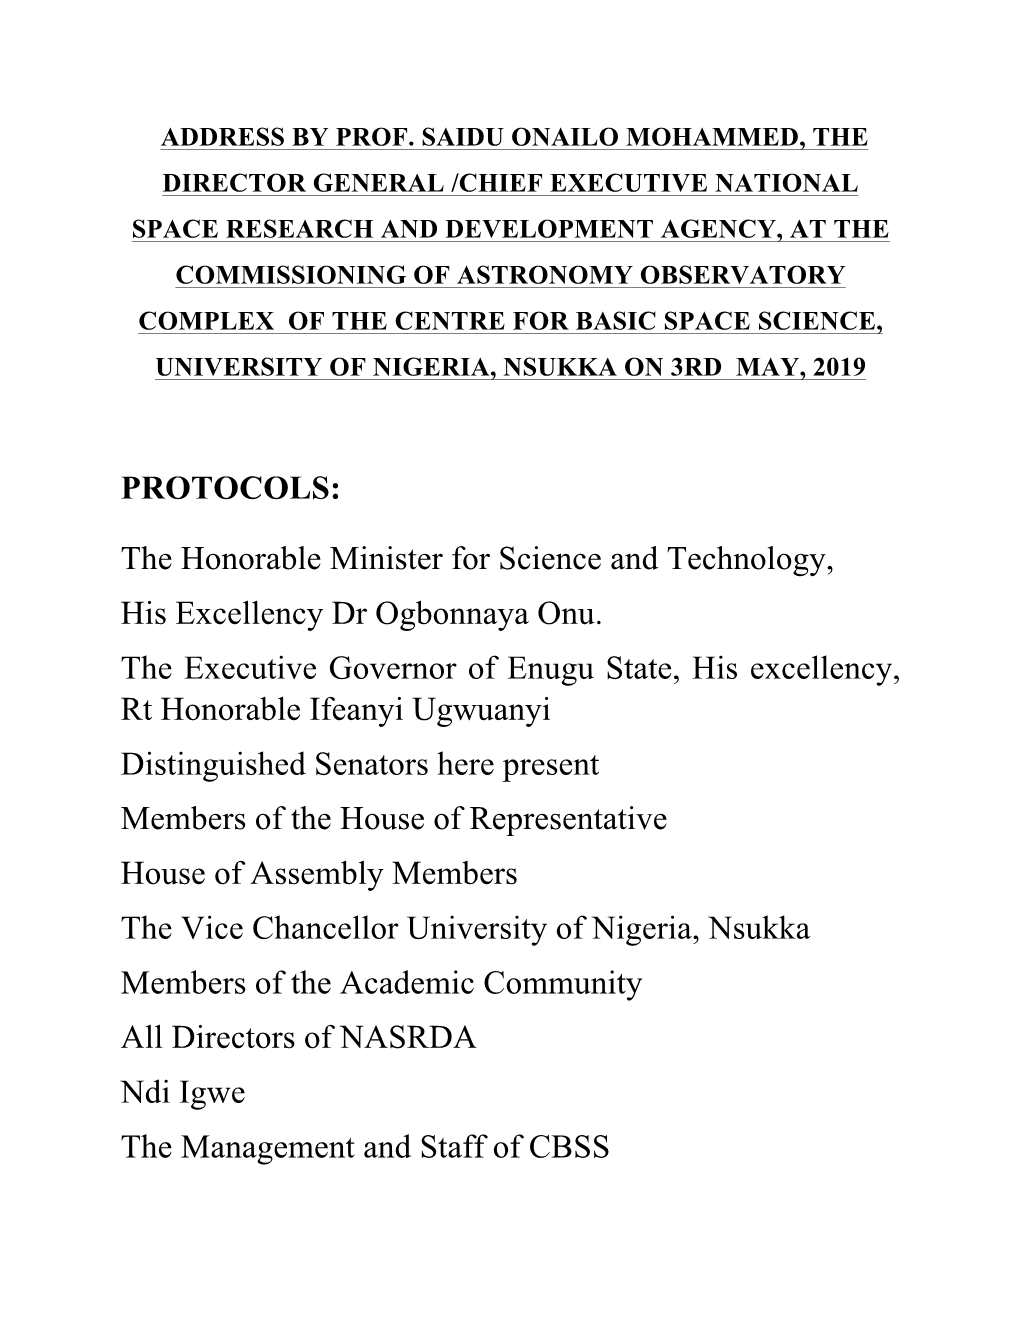 The Honorable Minister for Science and Technology, His Excellency Dr Ogbonnaya Onu